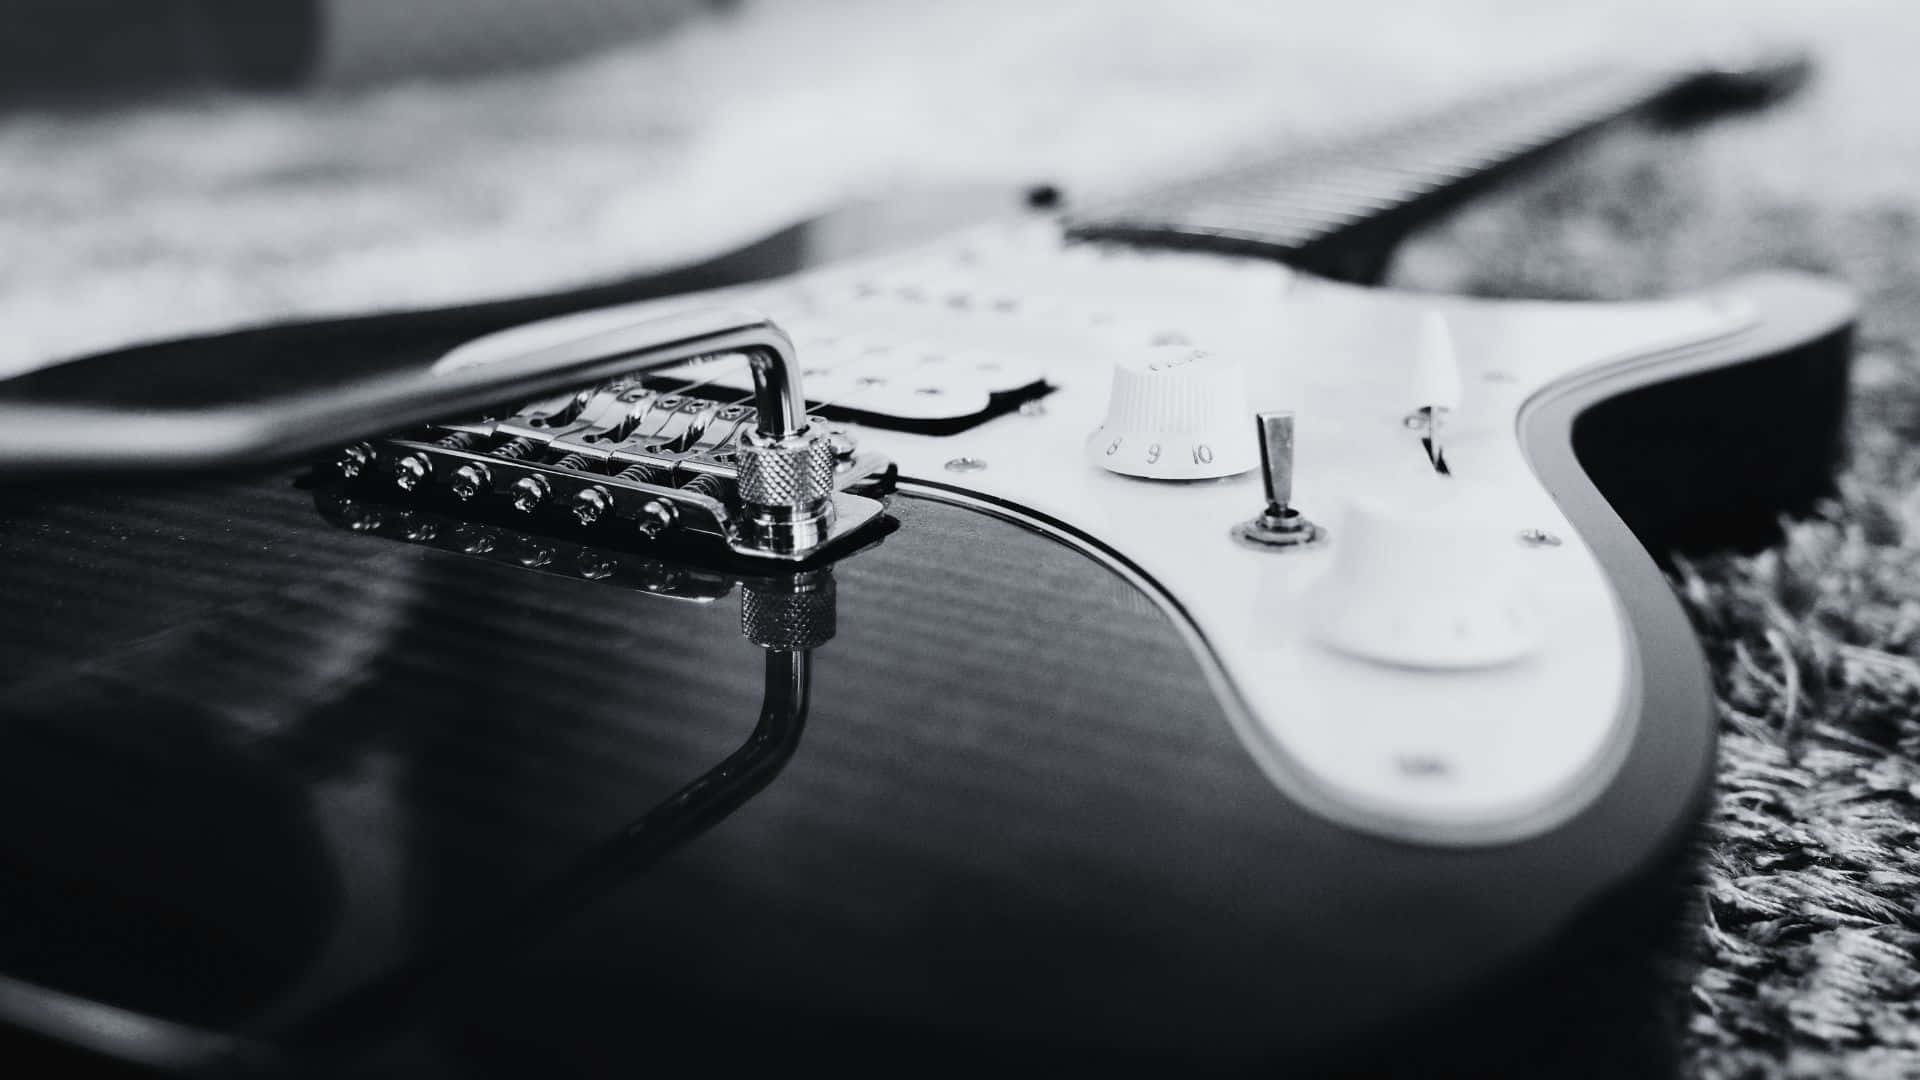 Download Caption: Black and White Guitar Wallpaper | Wallpapers.com